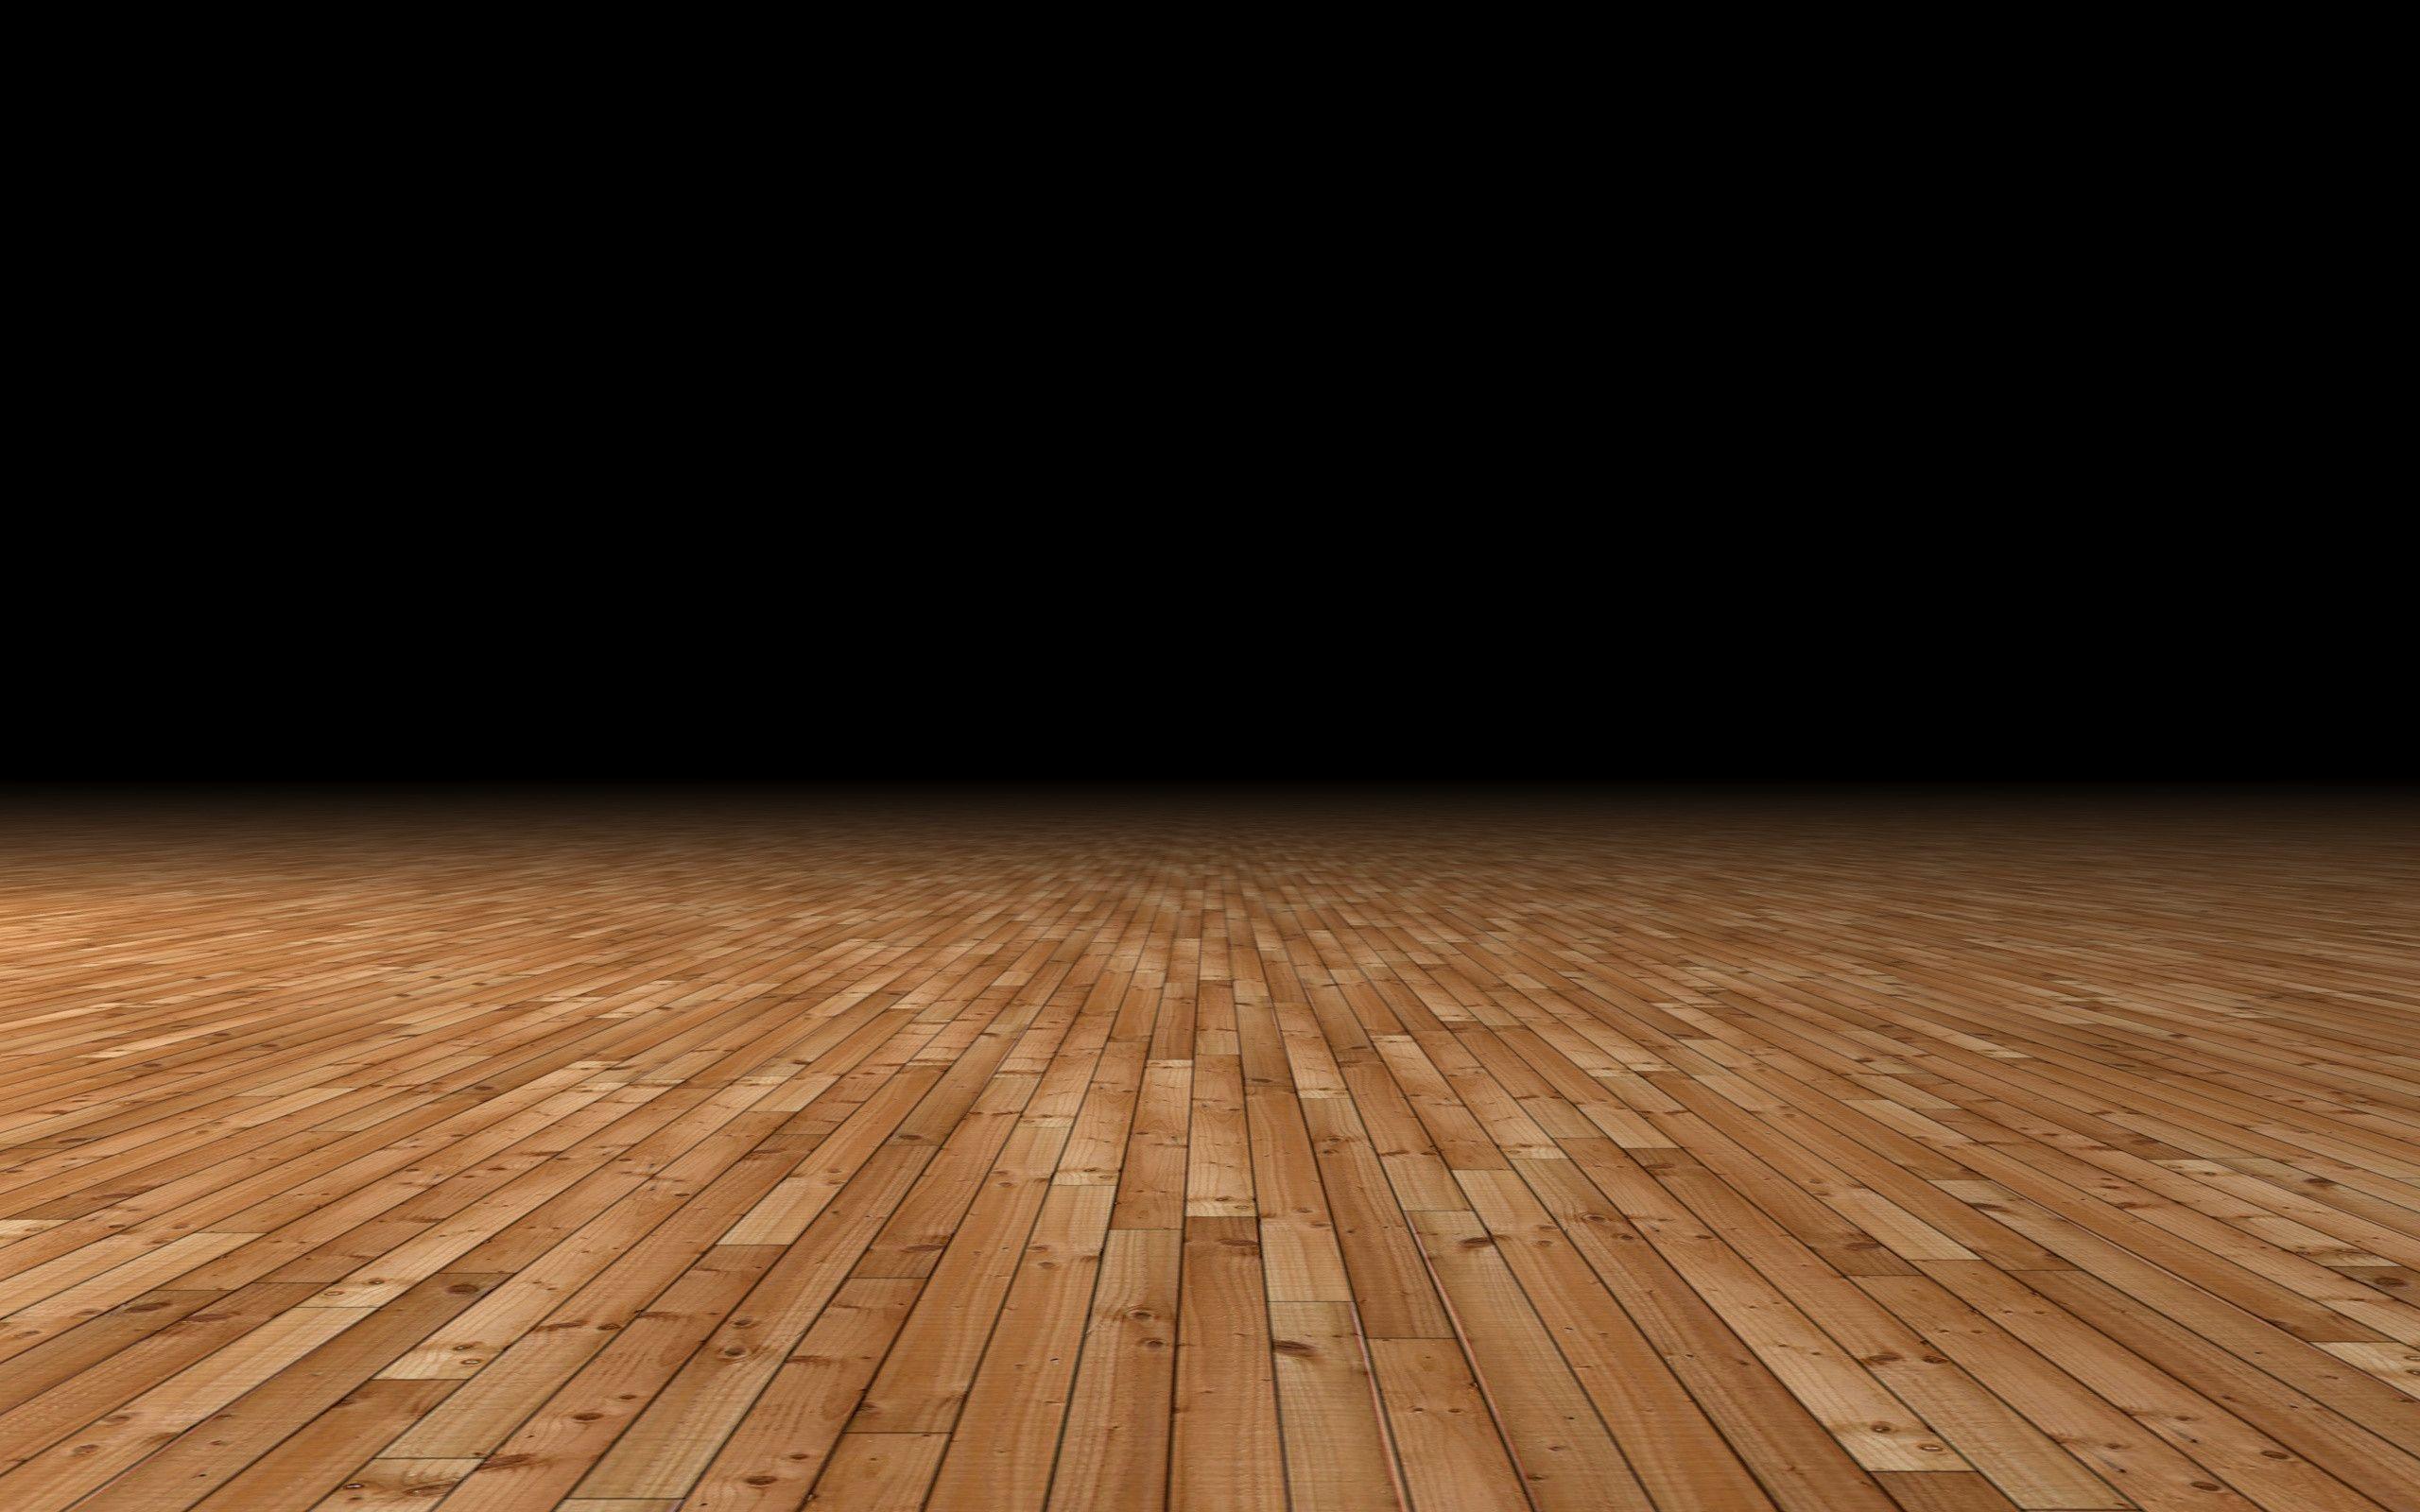 Free Basketball Backgrounds - Wallpaper Cave